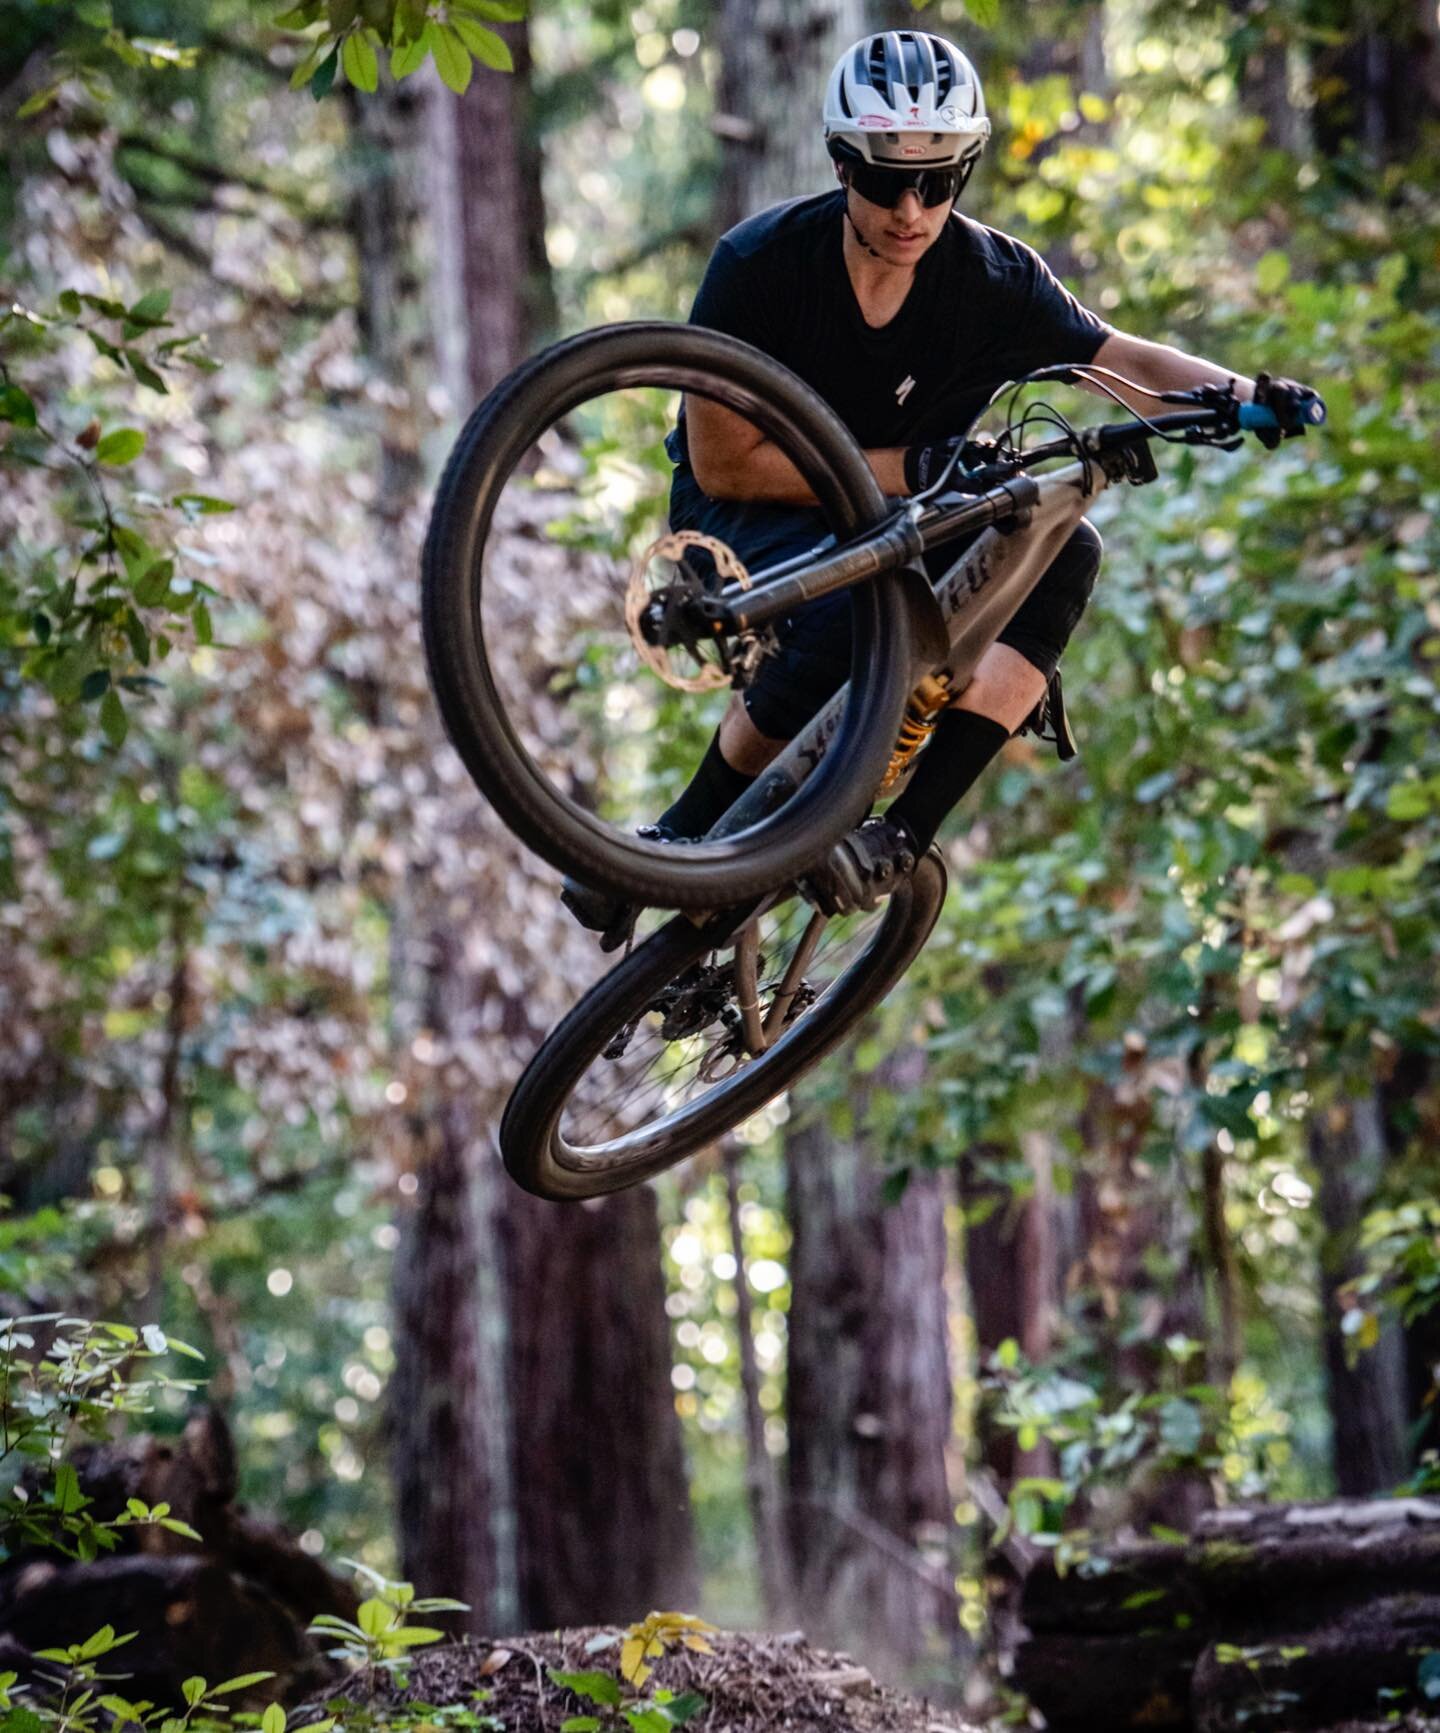 Send it into the weekend with style.  A quick snap from a fun shoot with @nickyd358 yesterday.
.
.
.
#mtb #style #air #jump #ride #bike #mountainbike #photoshoot #athlete #dirt #forest